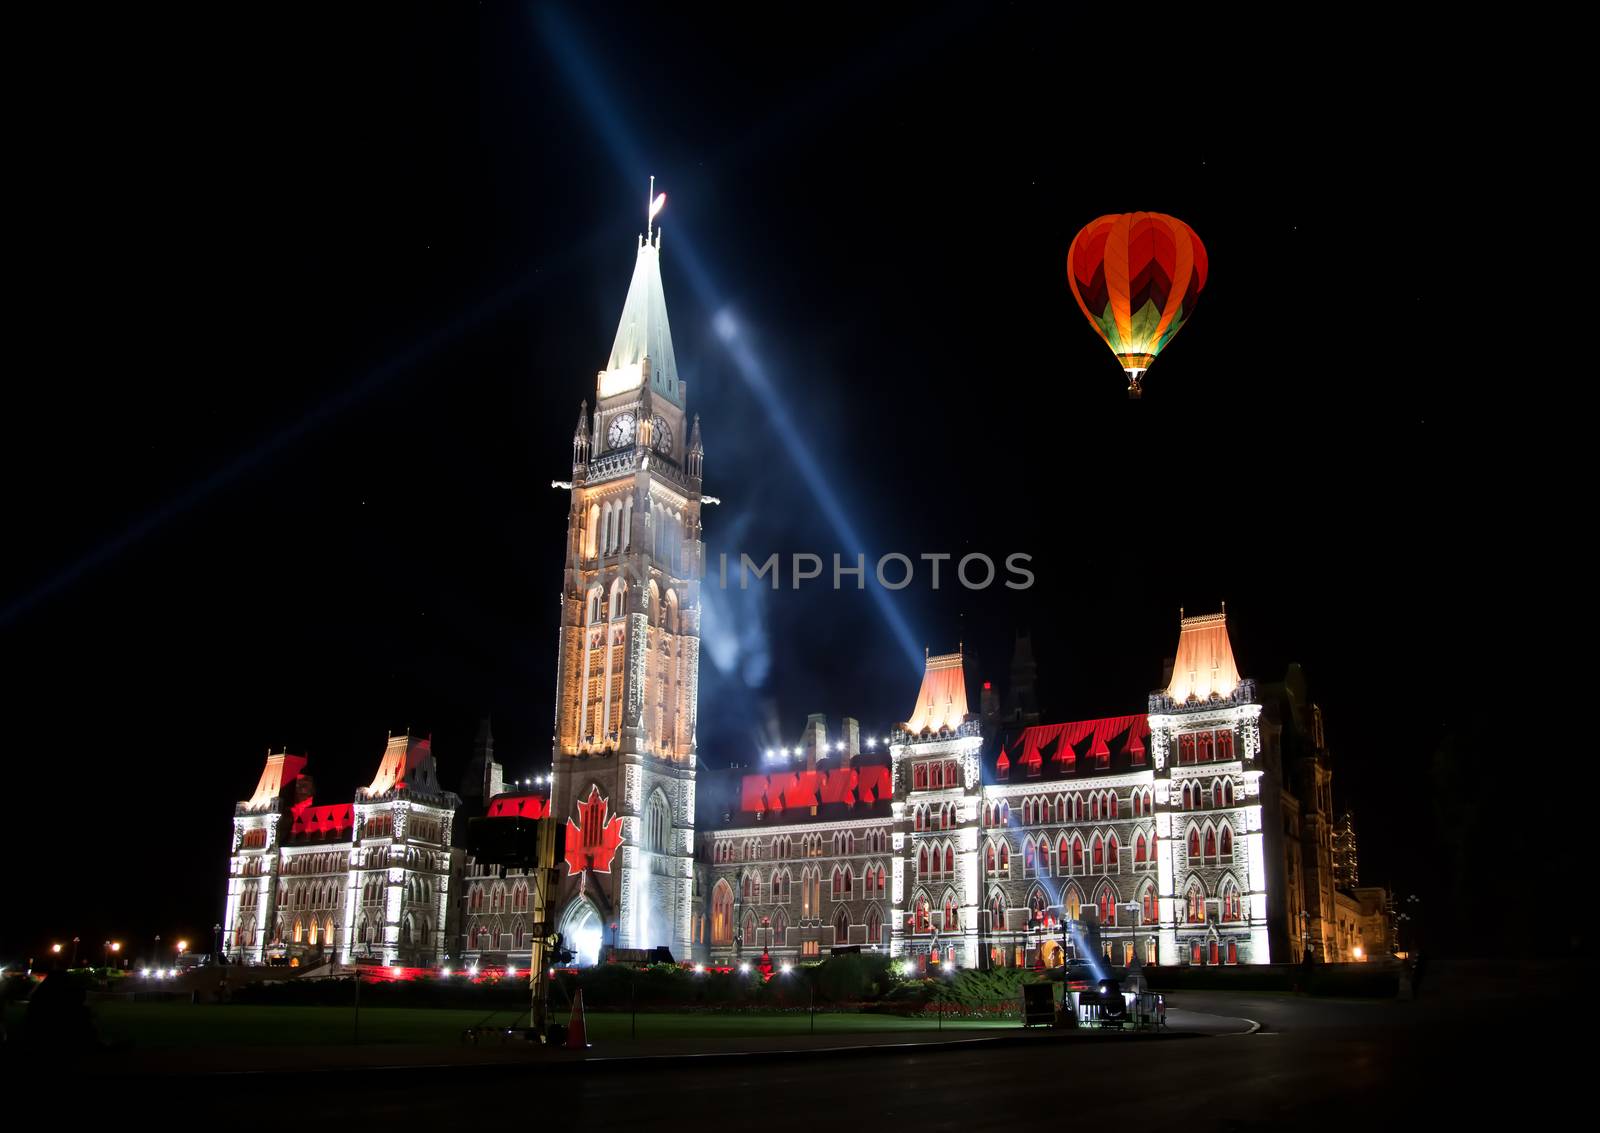 OTTAWA, CANADA ��� AUGEST 22:  The beautiful light show projected on the parliament building to celebrate the Canada���s rich history and friendly people in the summer night of August 22, 2011 in Ottawa, Canada.